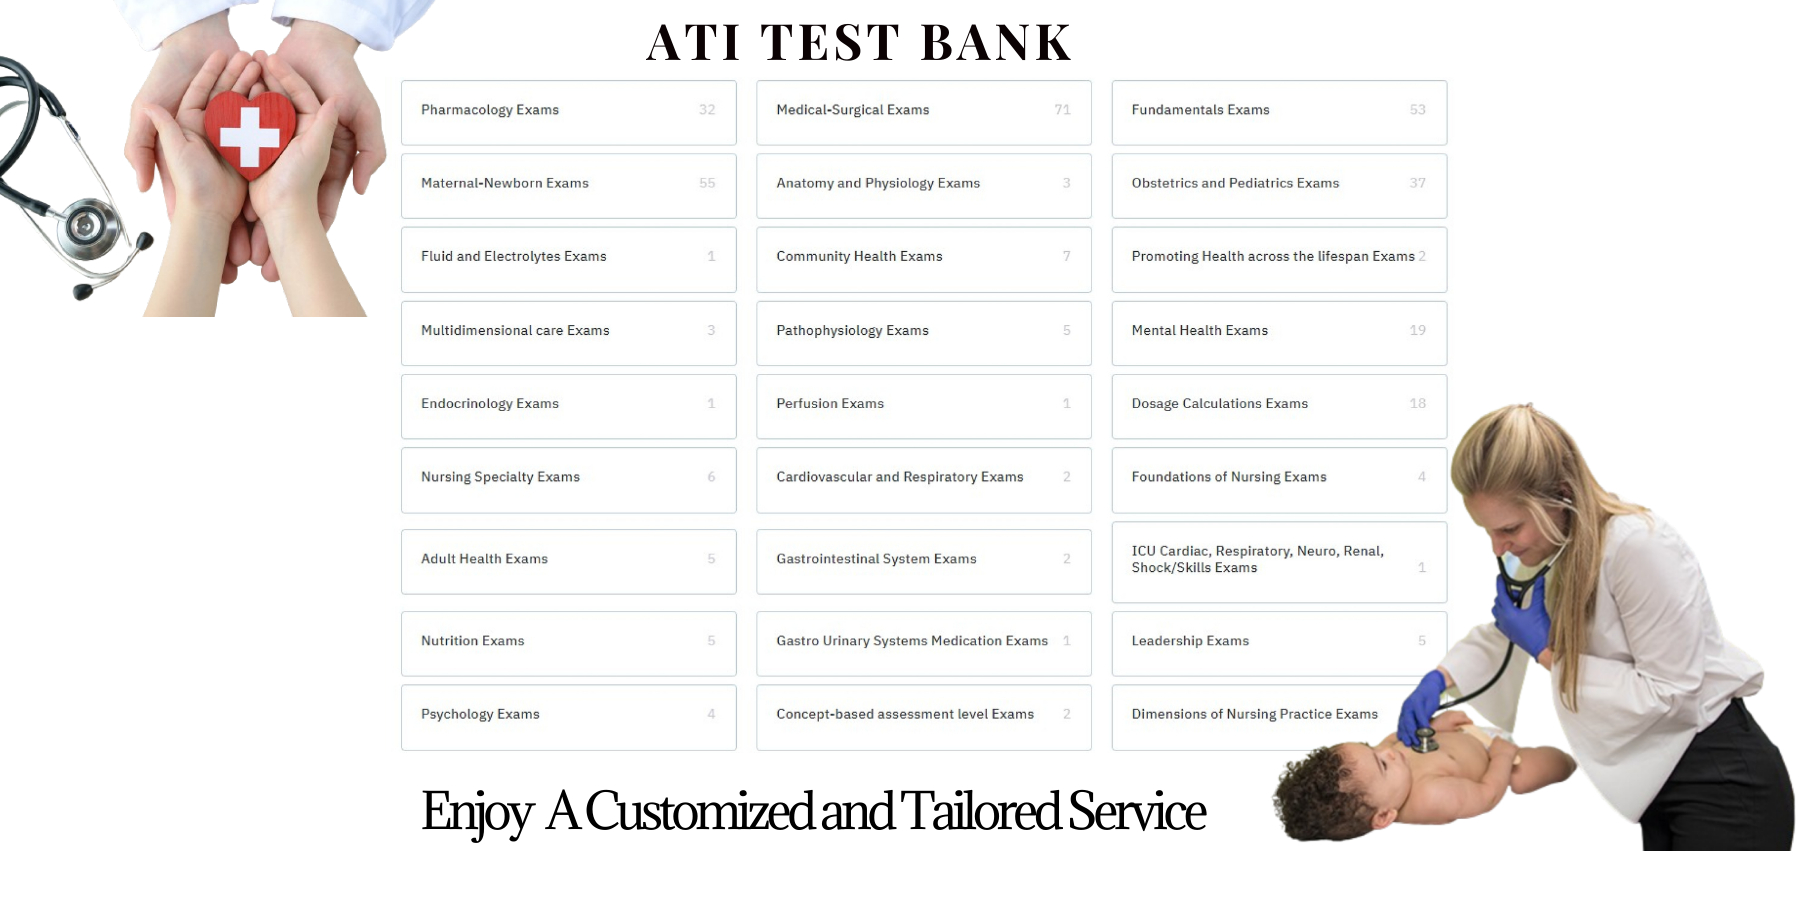 How-to-Access-ATI-Test-Bank